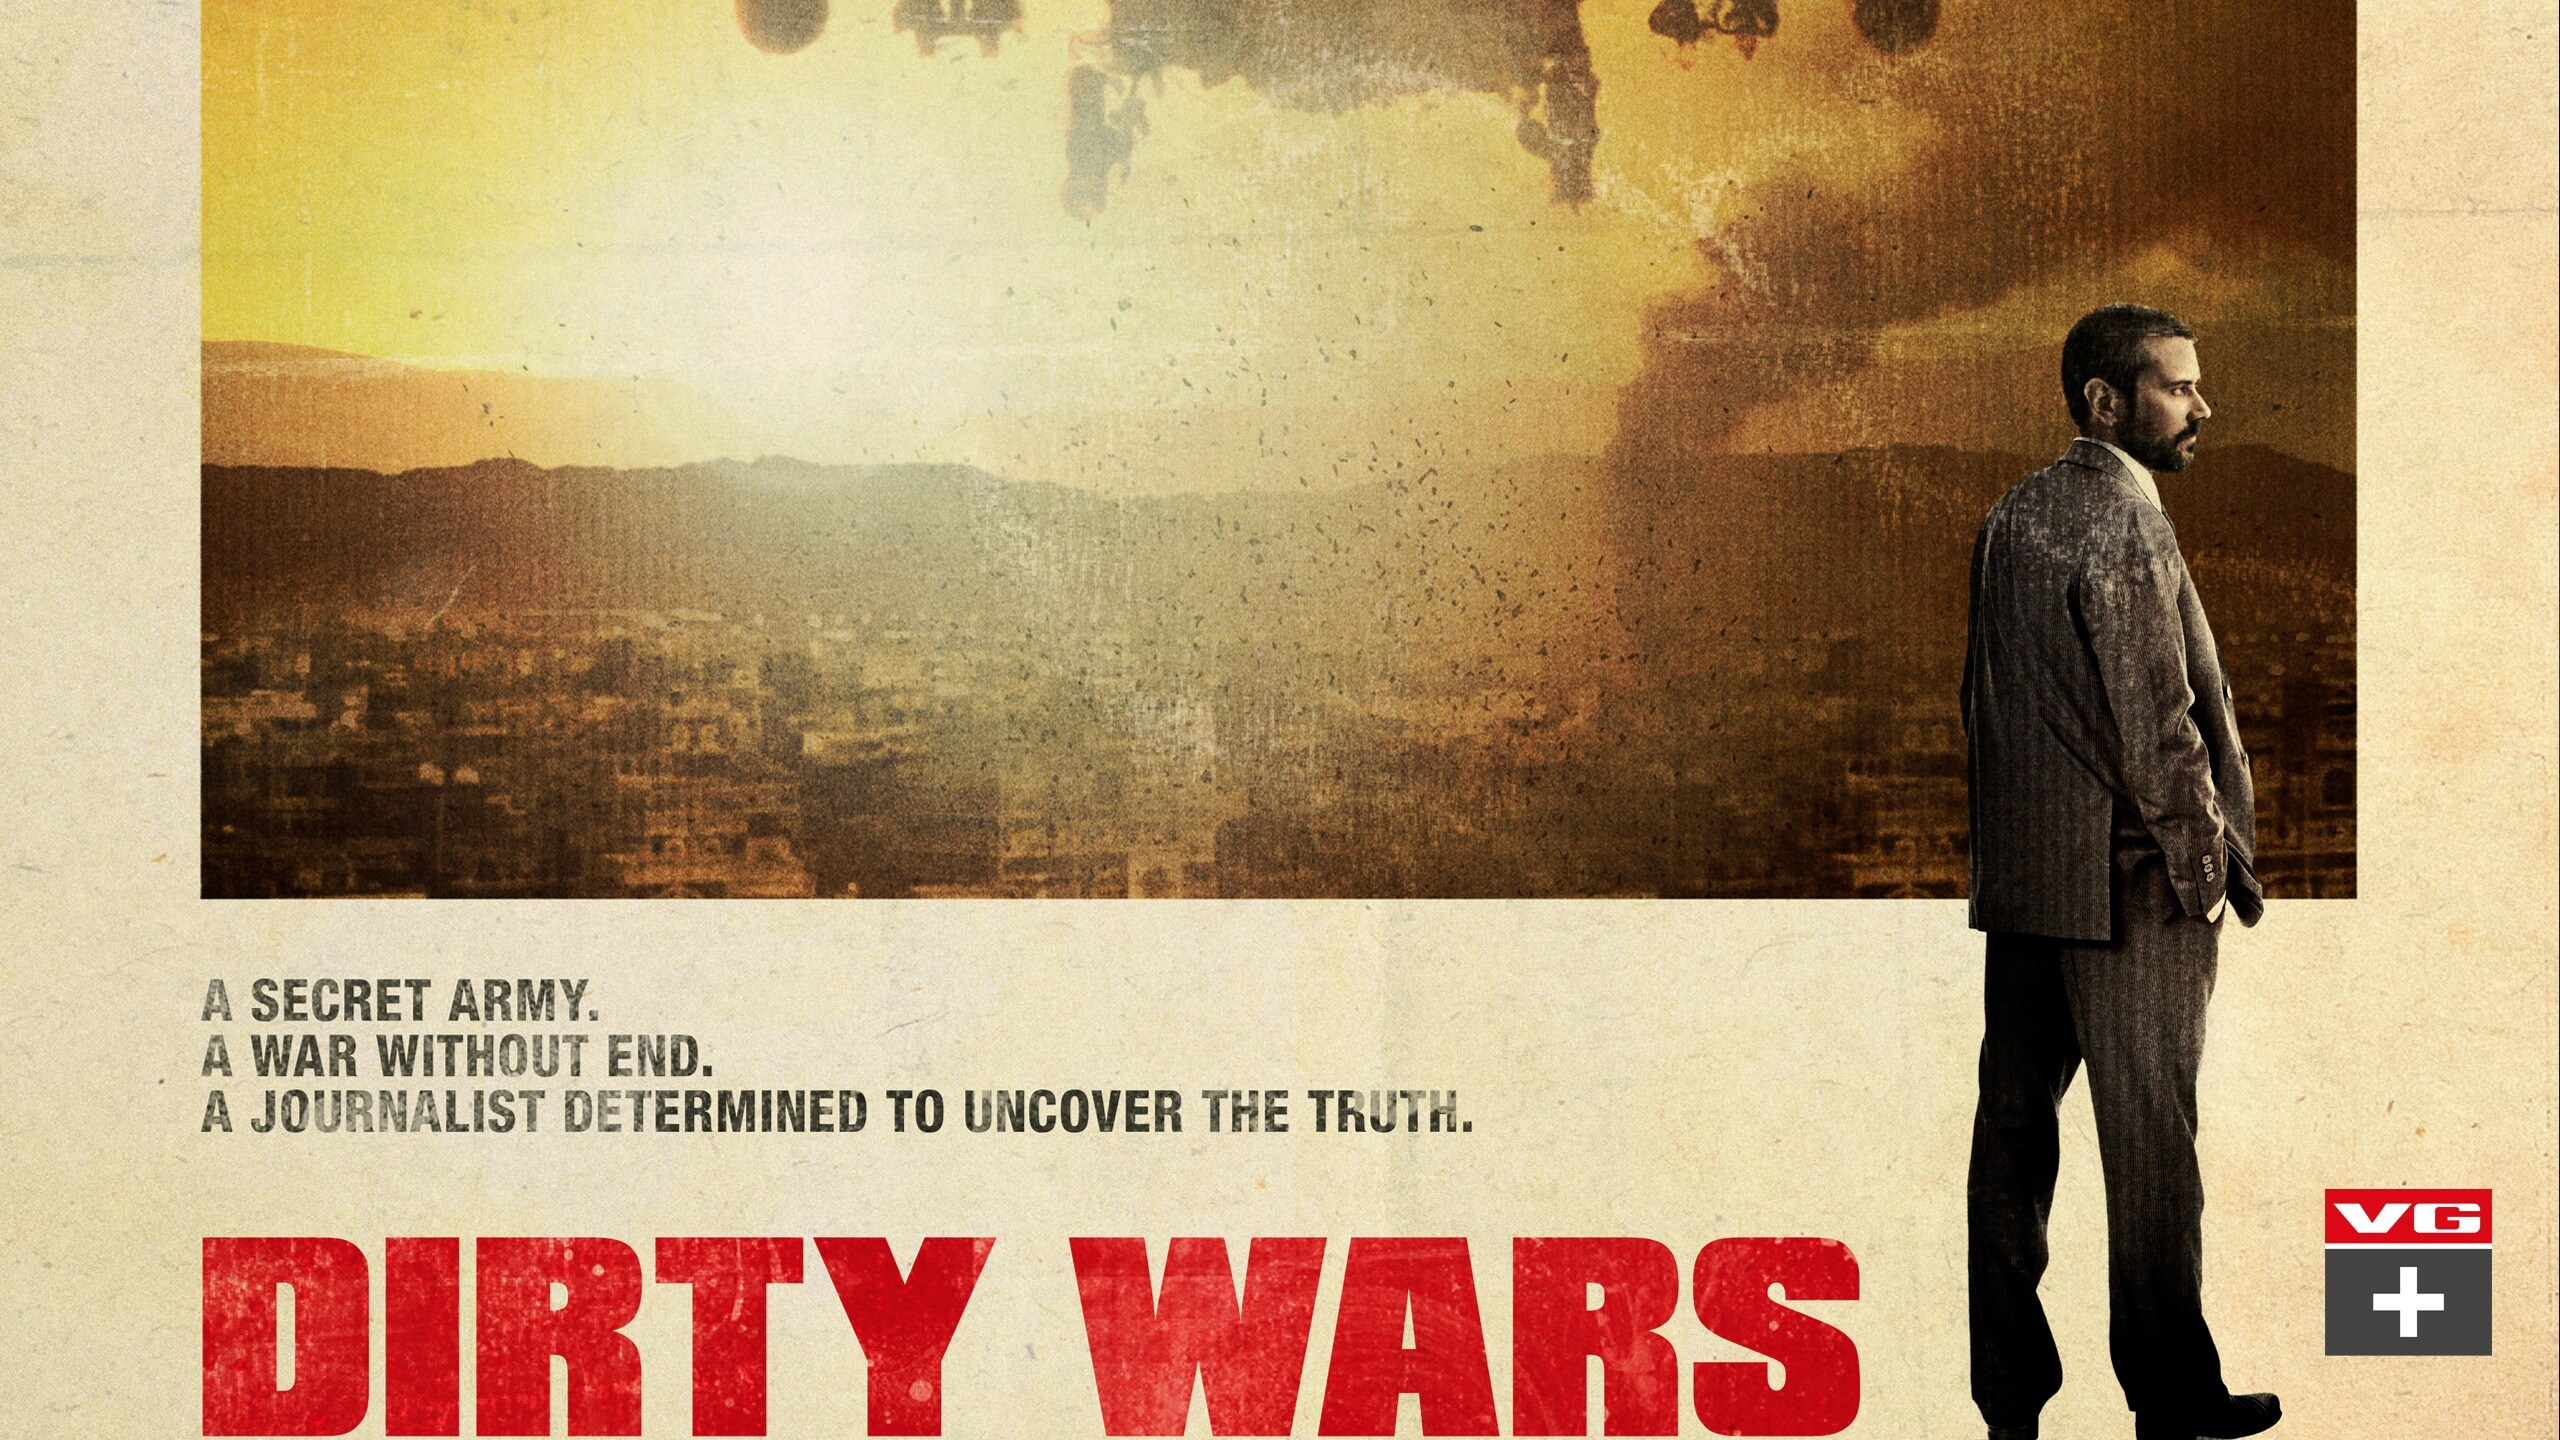 Without wars. Dirty Wars 2013. Uncover Wars.